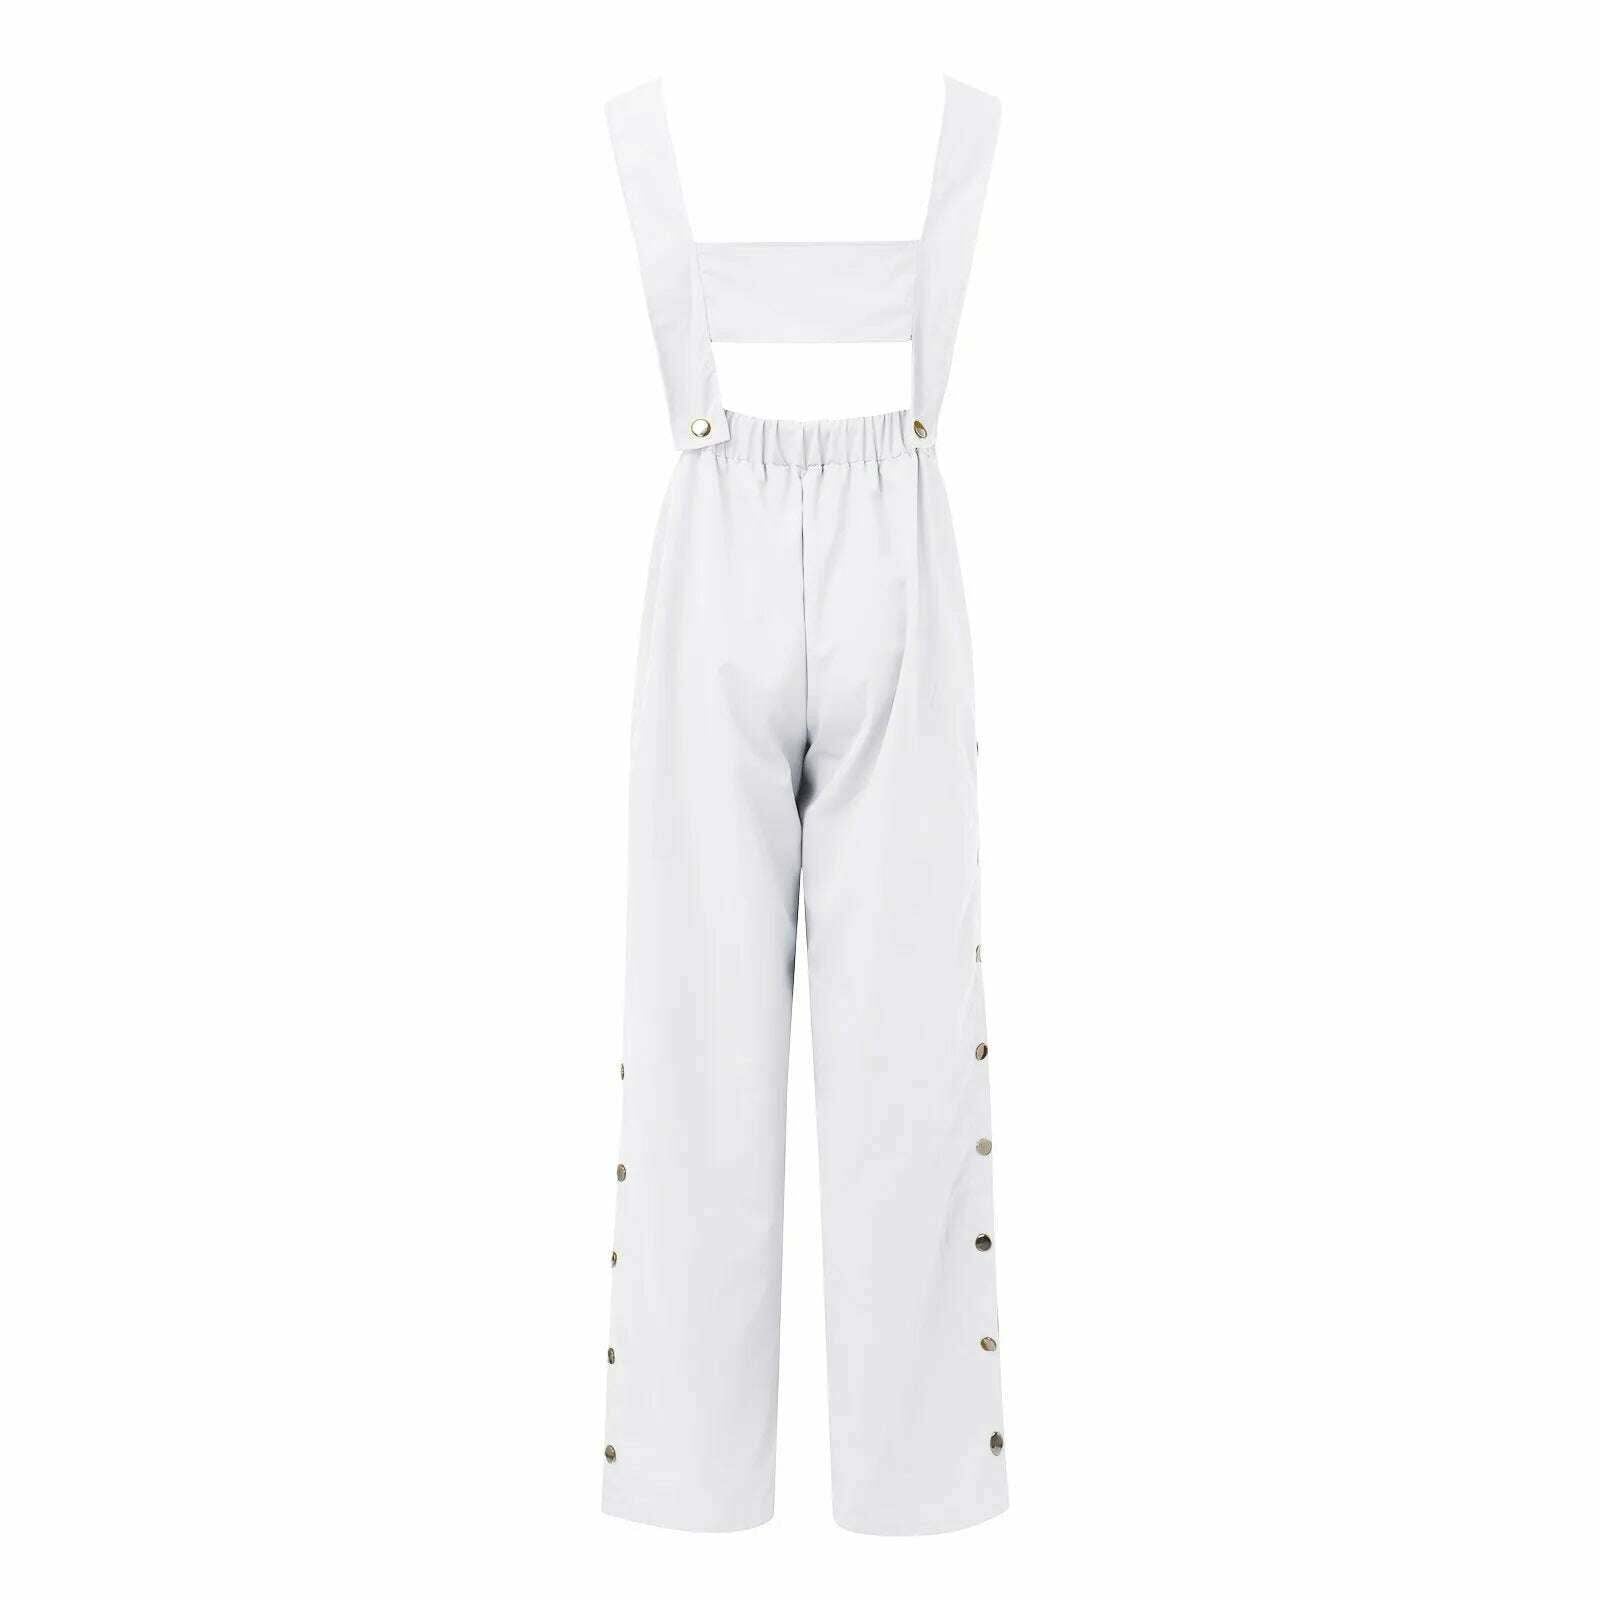 KIMLUD, Button Overalls for Women Summer Jumpsuit Solid Casual Openings Button Wide Leg Suspender Pants Overalls with Pockets, KIMLUD Womens Clothes